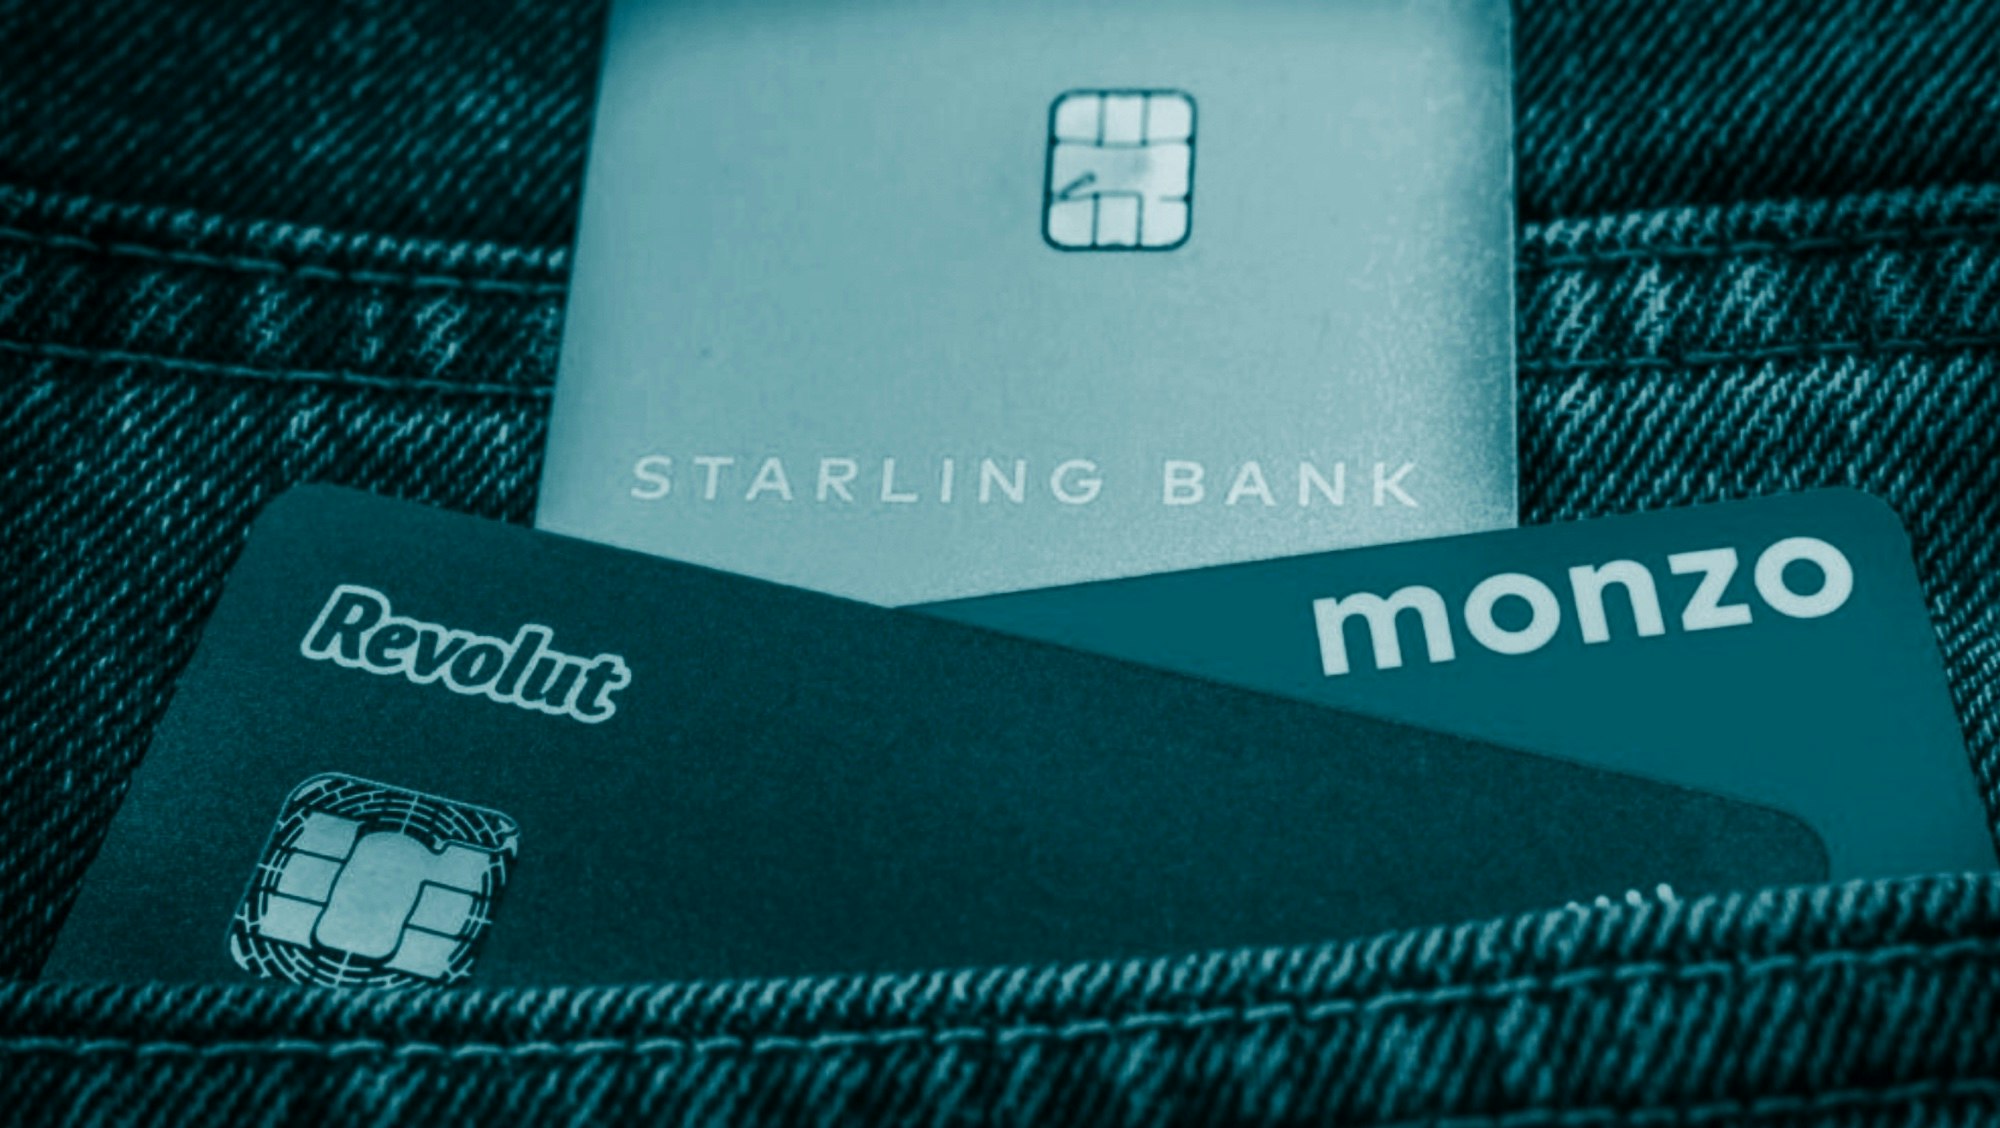 Image of a Revolut, Monzo and Starling card in the back pocket of a pair of jeans.